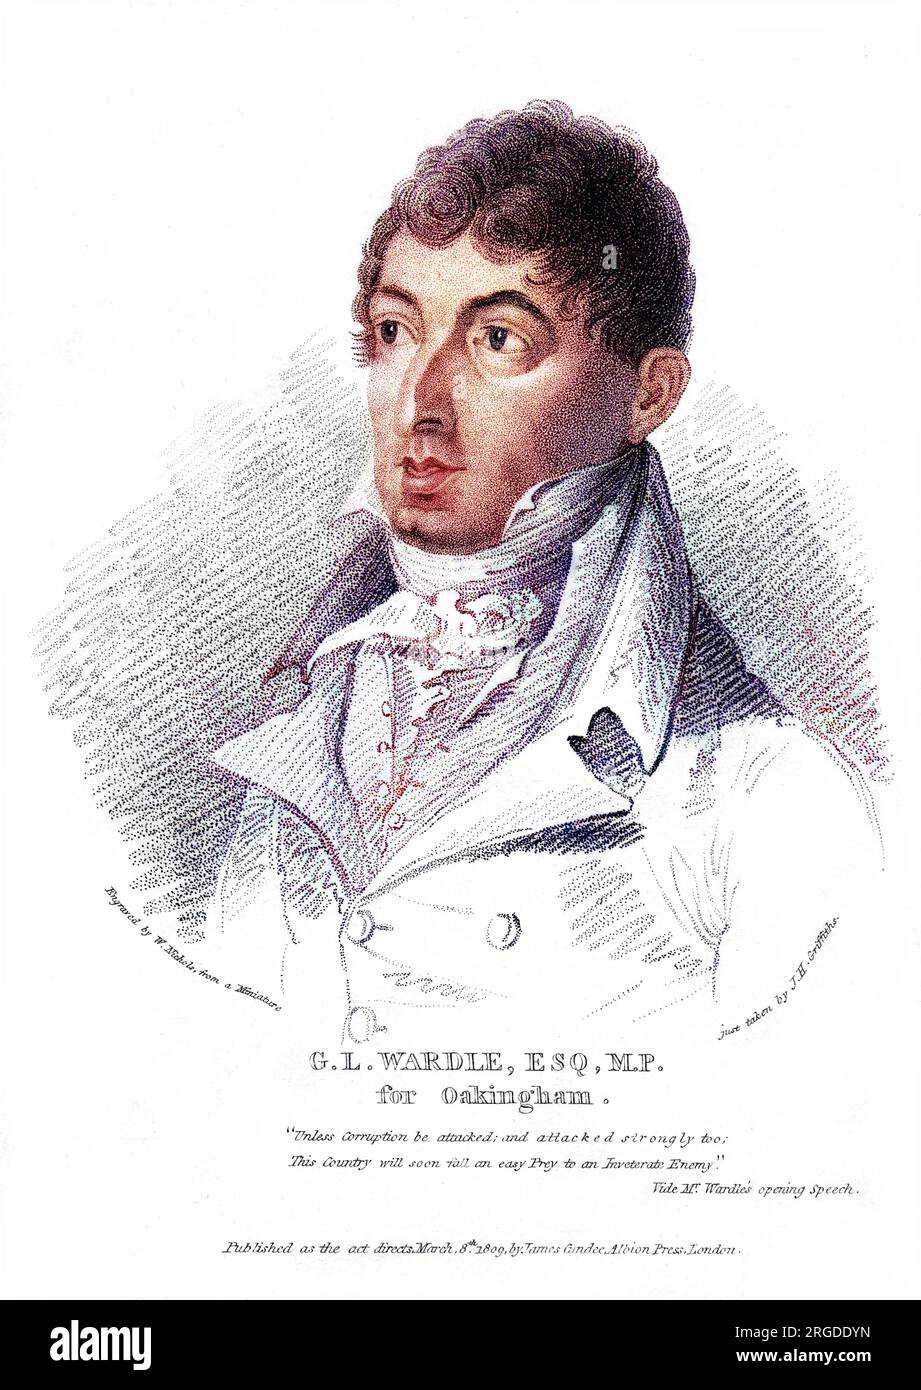 GWYLLYM LLOYD WARDLE Statesman, member of parliament for Oakingham, who took leading part in accusing the duke of York of trafficking in commissions. Stock Photo